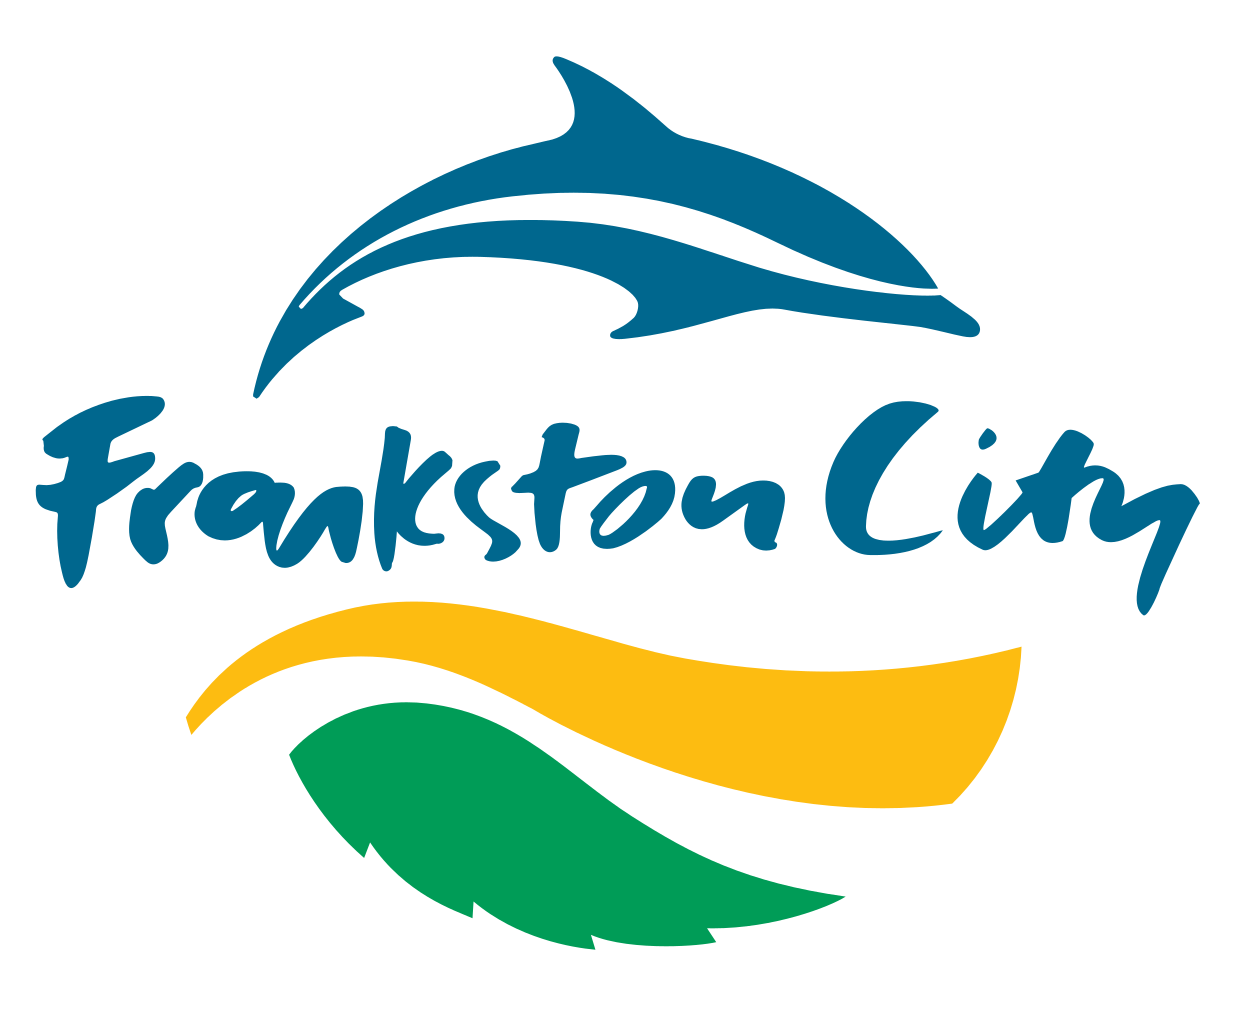 Image result for frankston city council